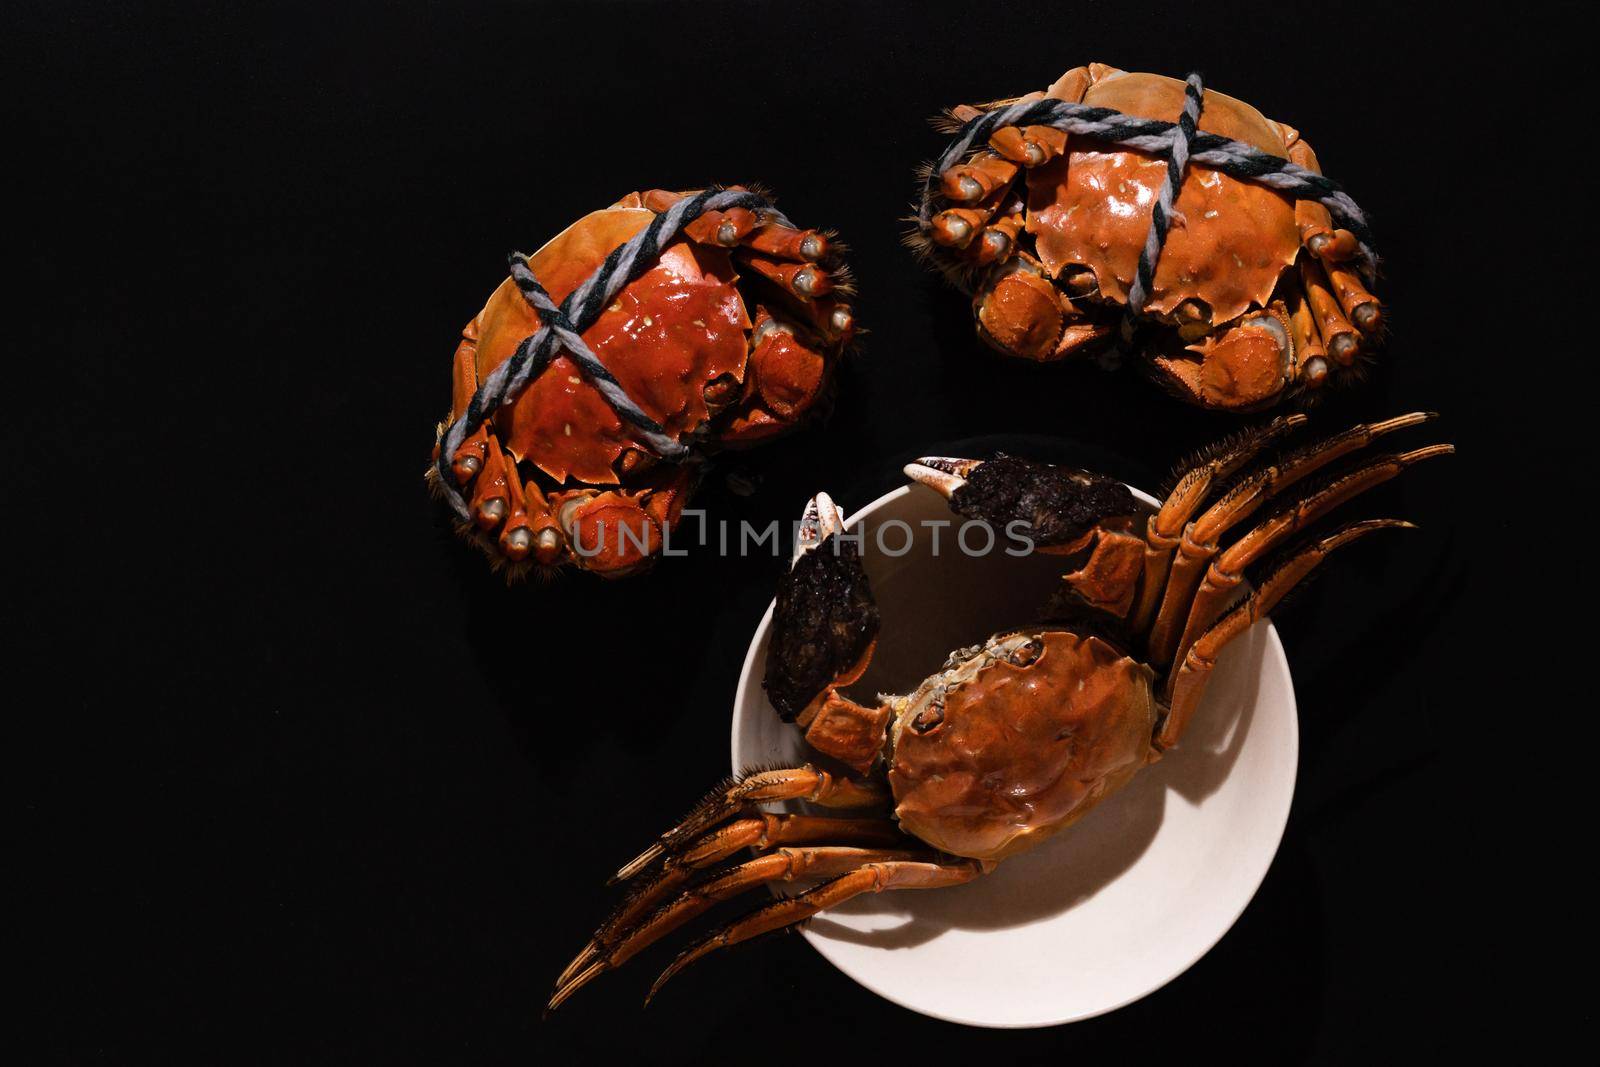 boiled Shanghai hairy crab or Chinese mitten crab (Eriocheir sinensis) with Chili and herb on black background by psodaz